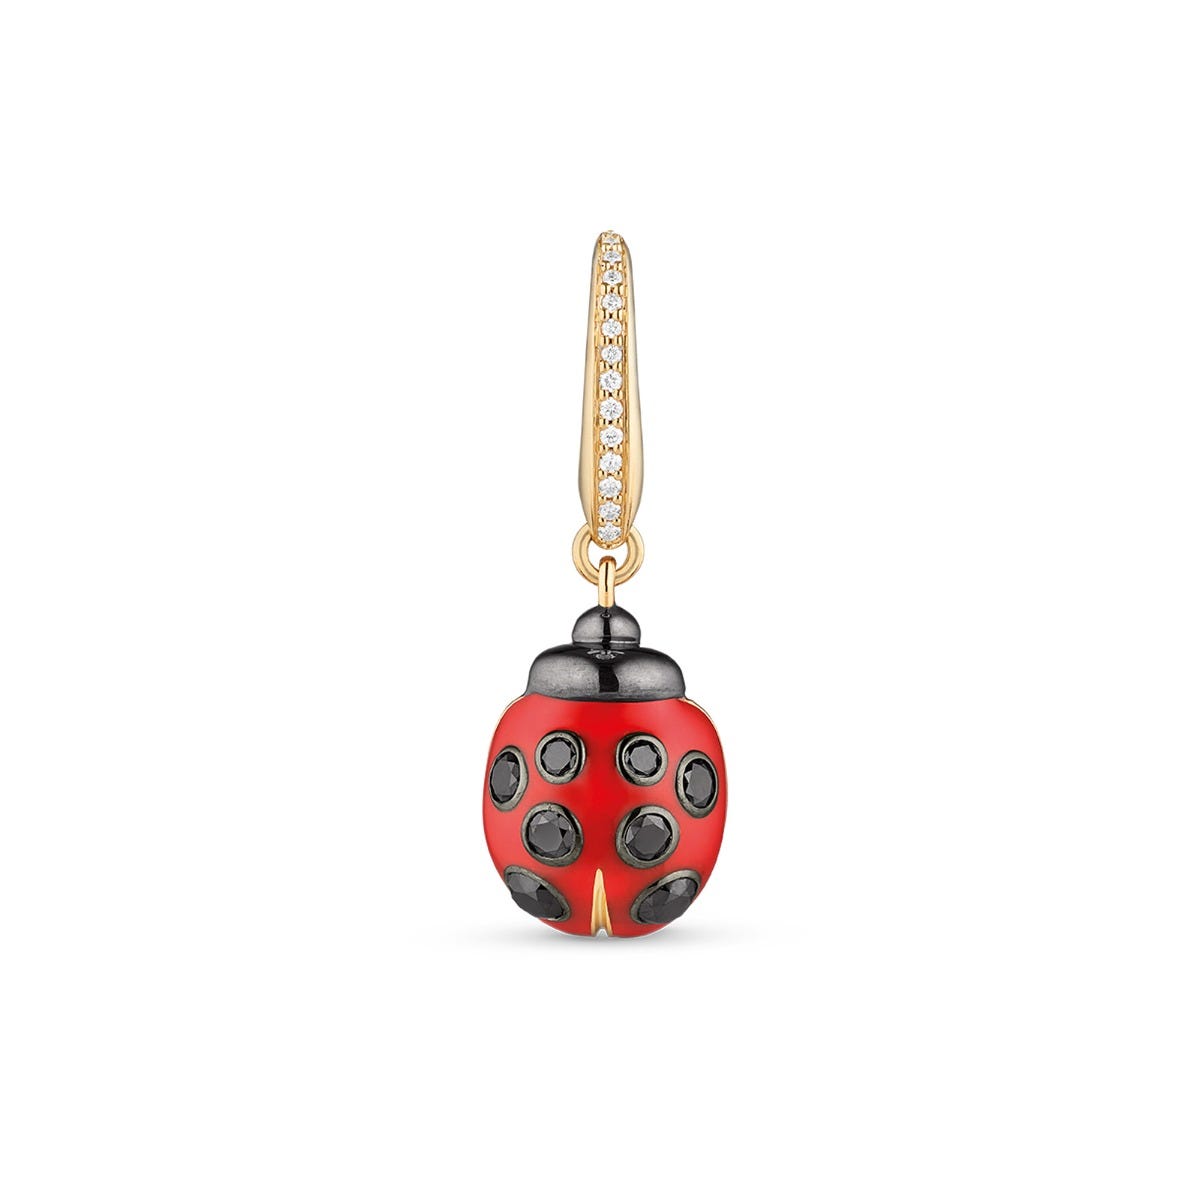 Woodland Ladybird Charm in Enamelled 18ct Yellow Gold with Diamonds